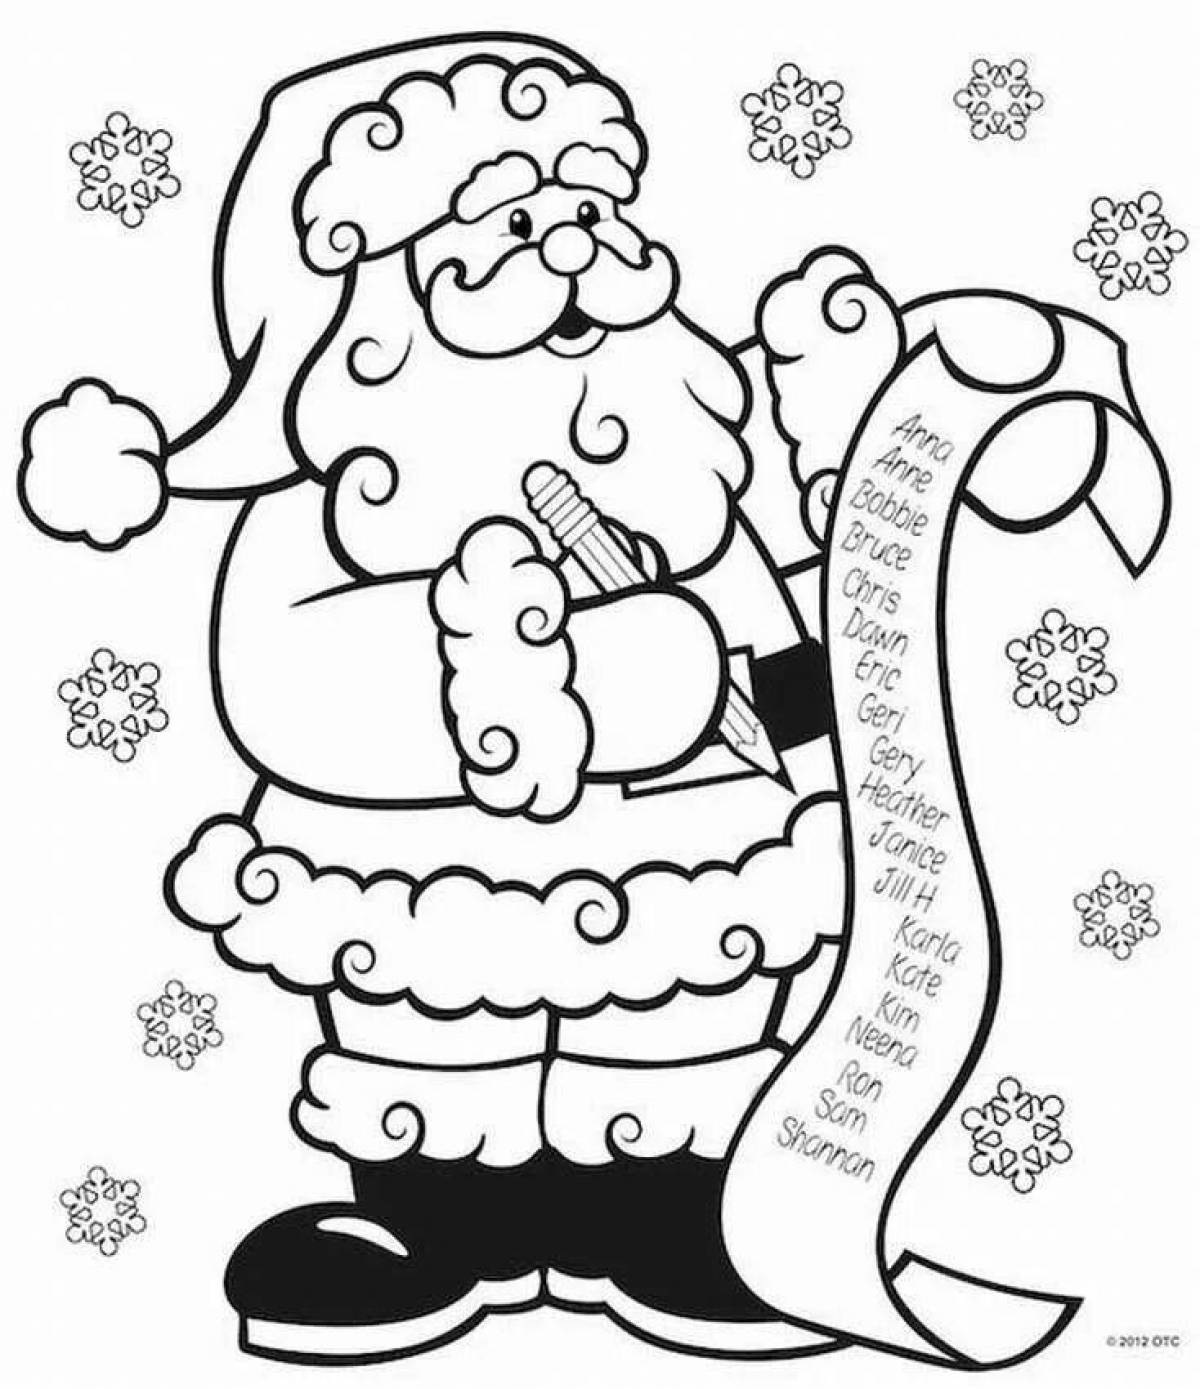 Crazy Santa Claus coloring book for 2-3 year olds